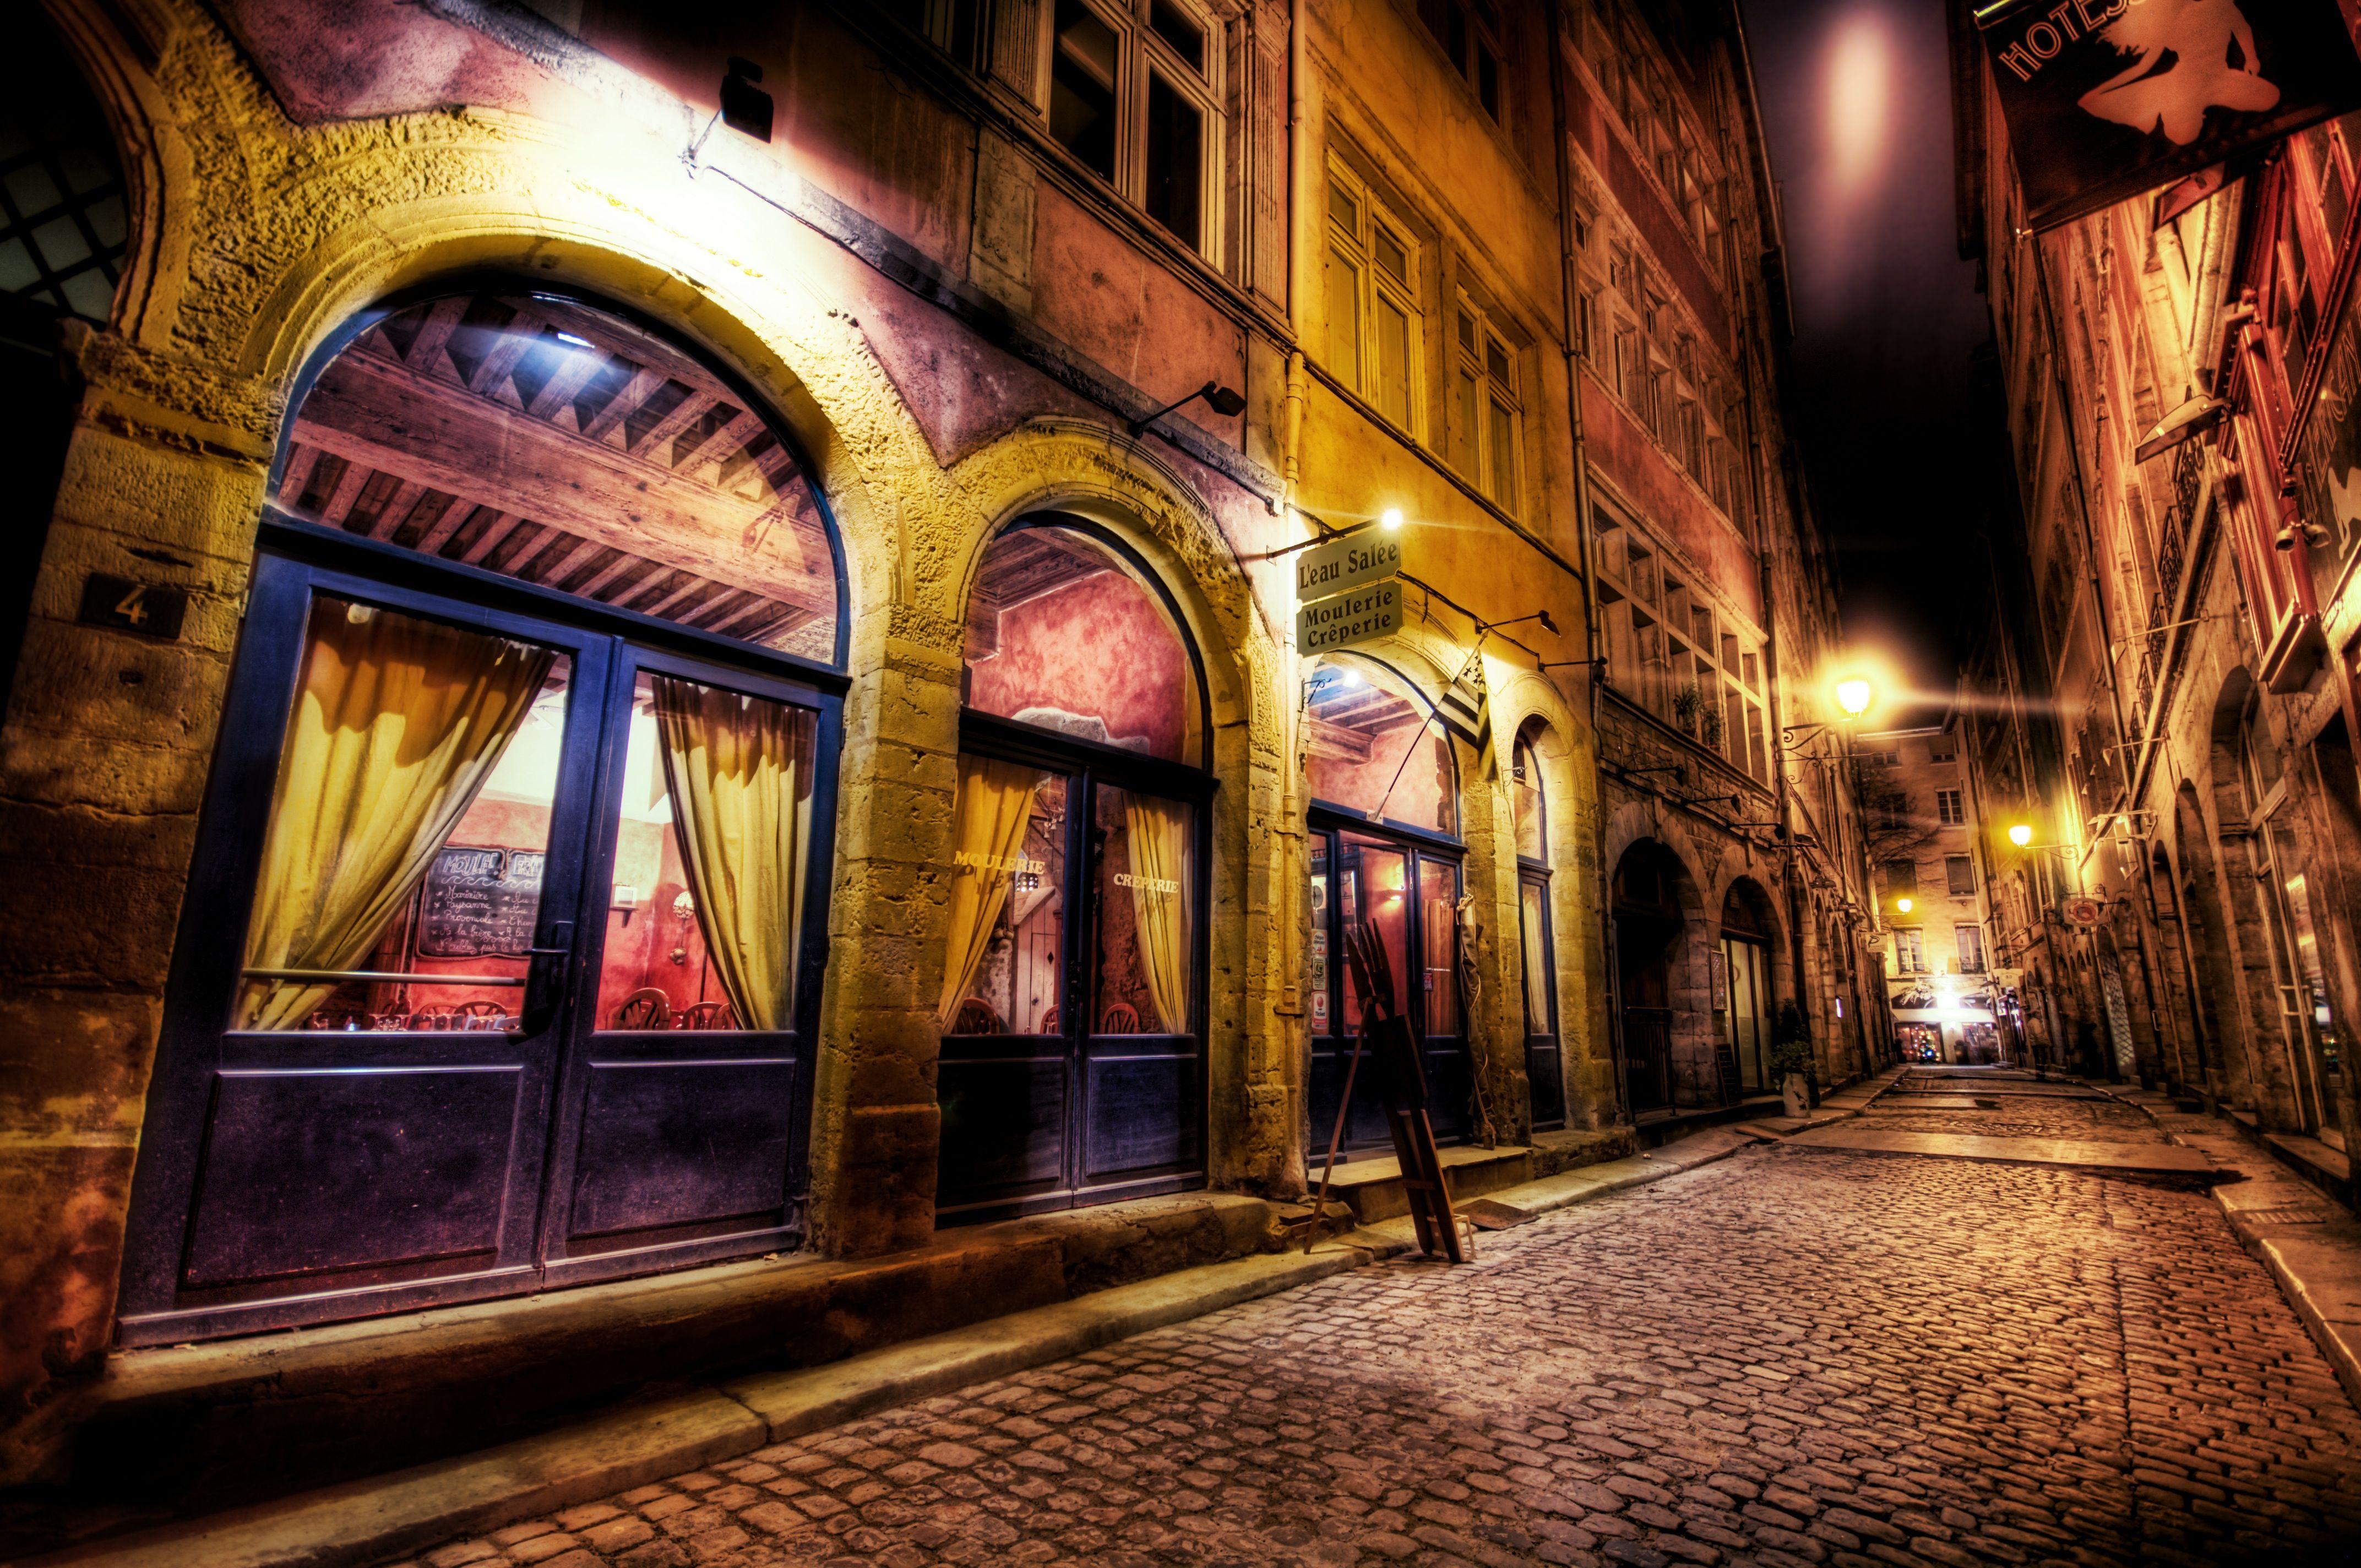 cityscapes restaurant hdr photography lyon #orQe